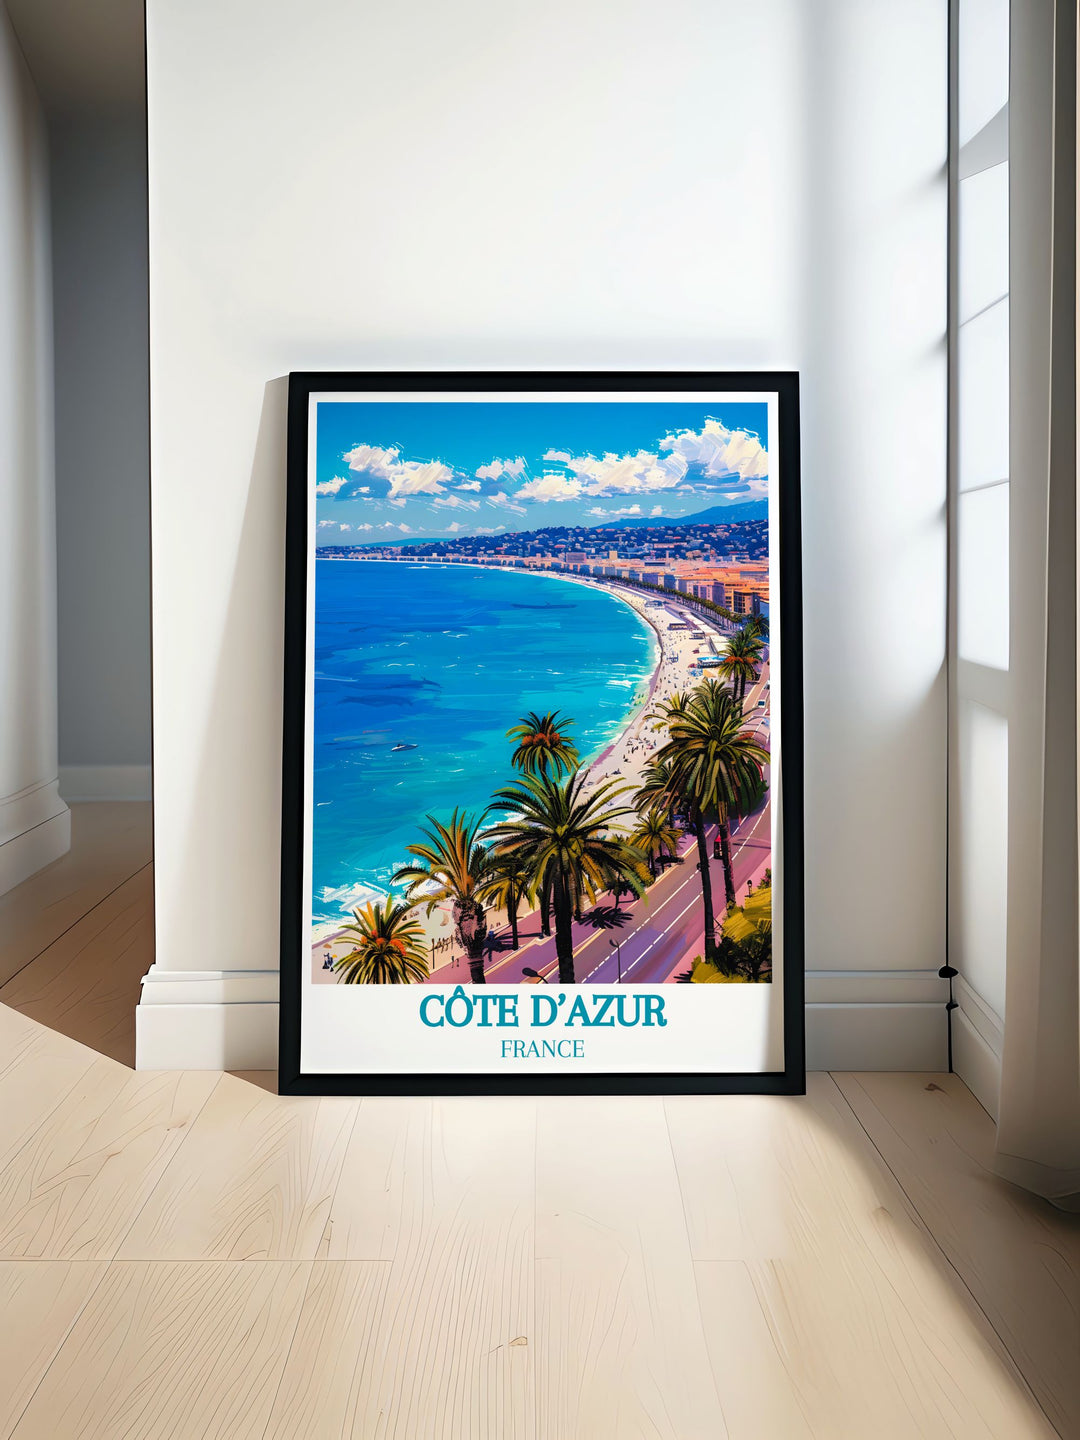 Gallery wall art of the Côte dAzur, highlighting the serene beauty of Promenade des Anglais, Nice, France. This print features the picturesque boulevard, vibrant life, and clear Mediterranean waters, offering a captivating depiction of the Riviera.